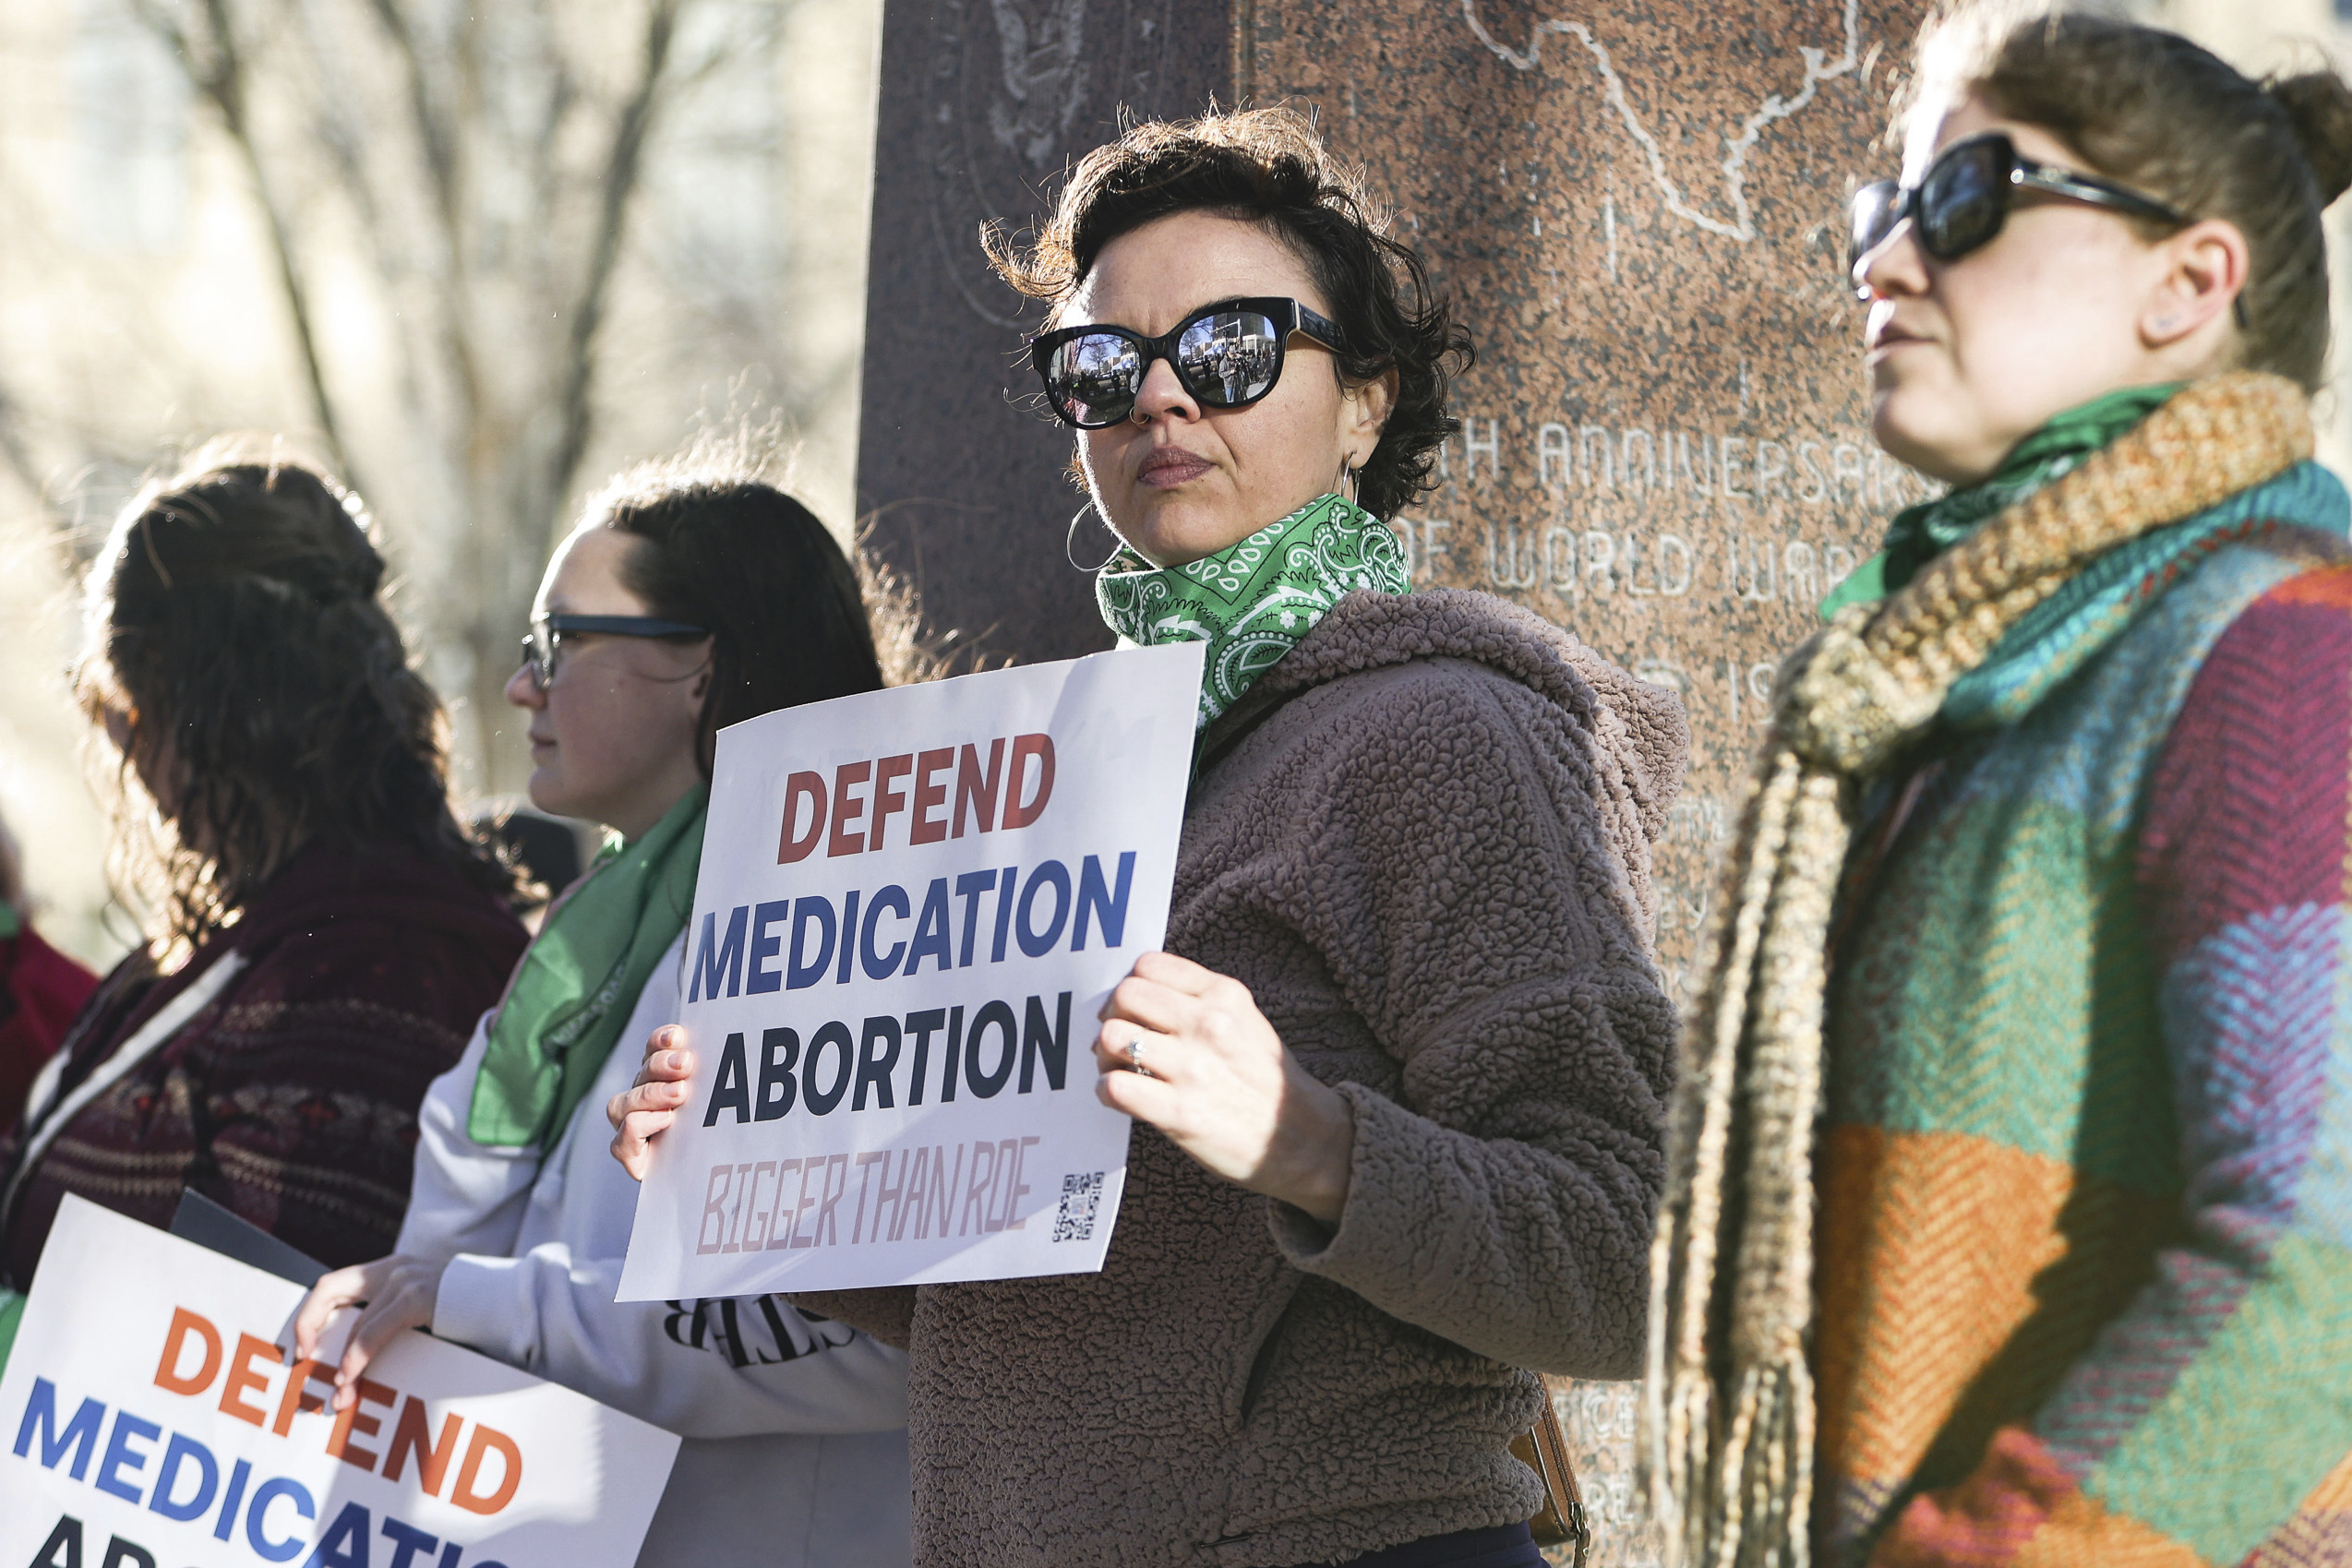 PHOTO: Lindsay London holds protest sign in front of federal court building in support of access to abortion medication outside the Federal Courthouse, March 15, 2023, in Amarillo, Texas.